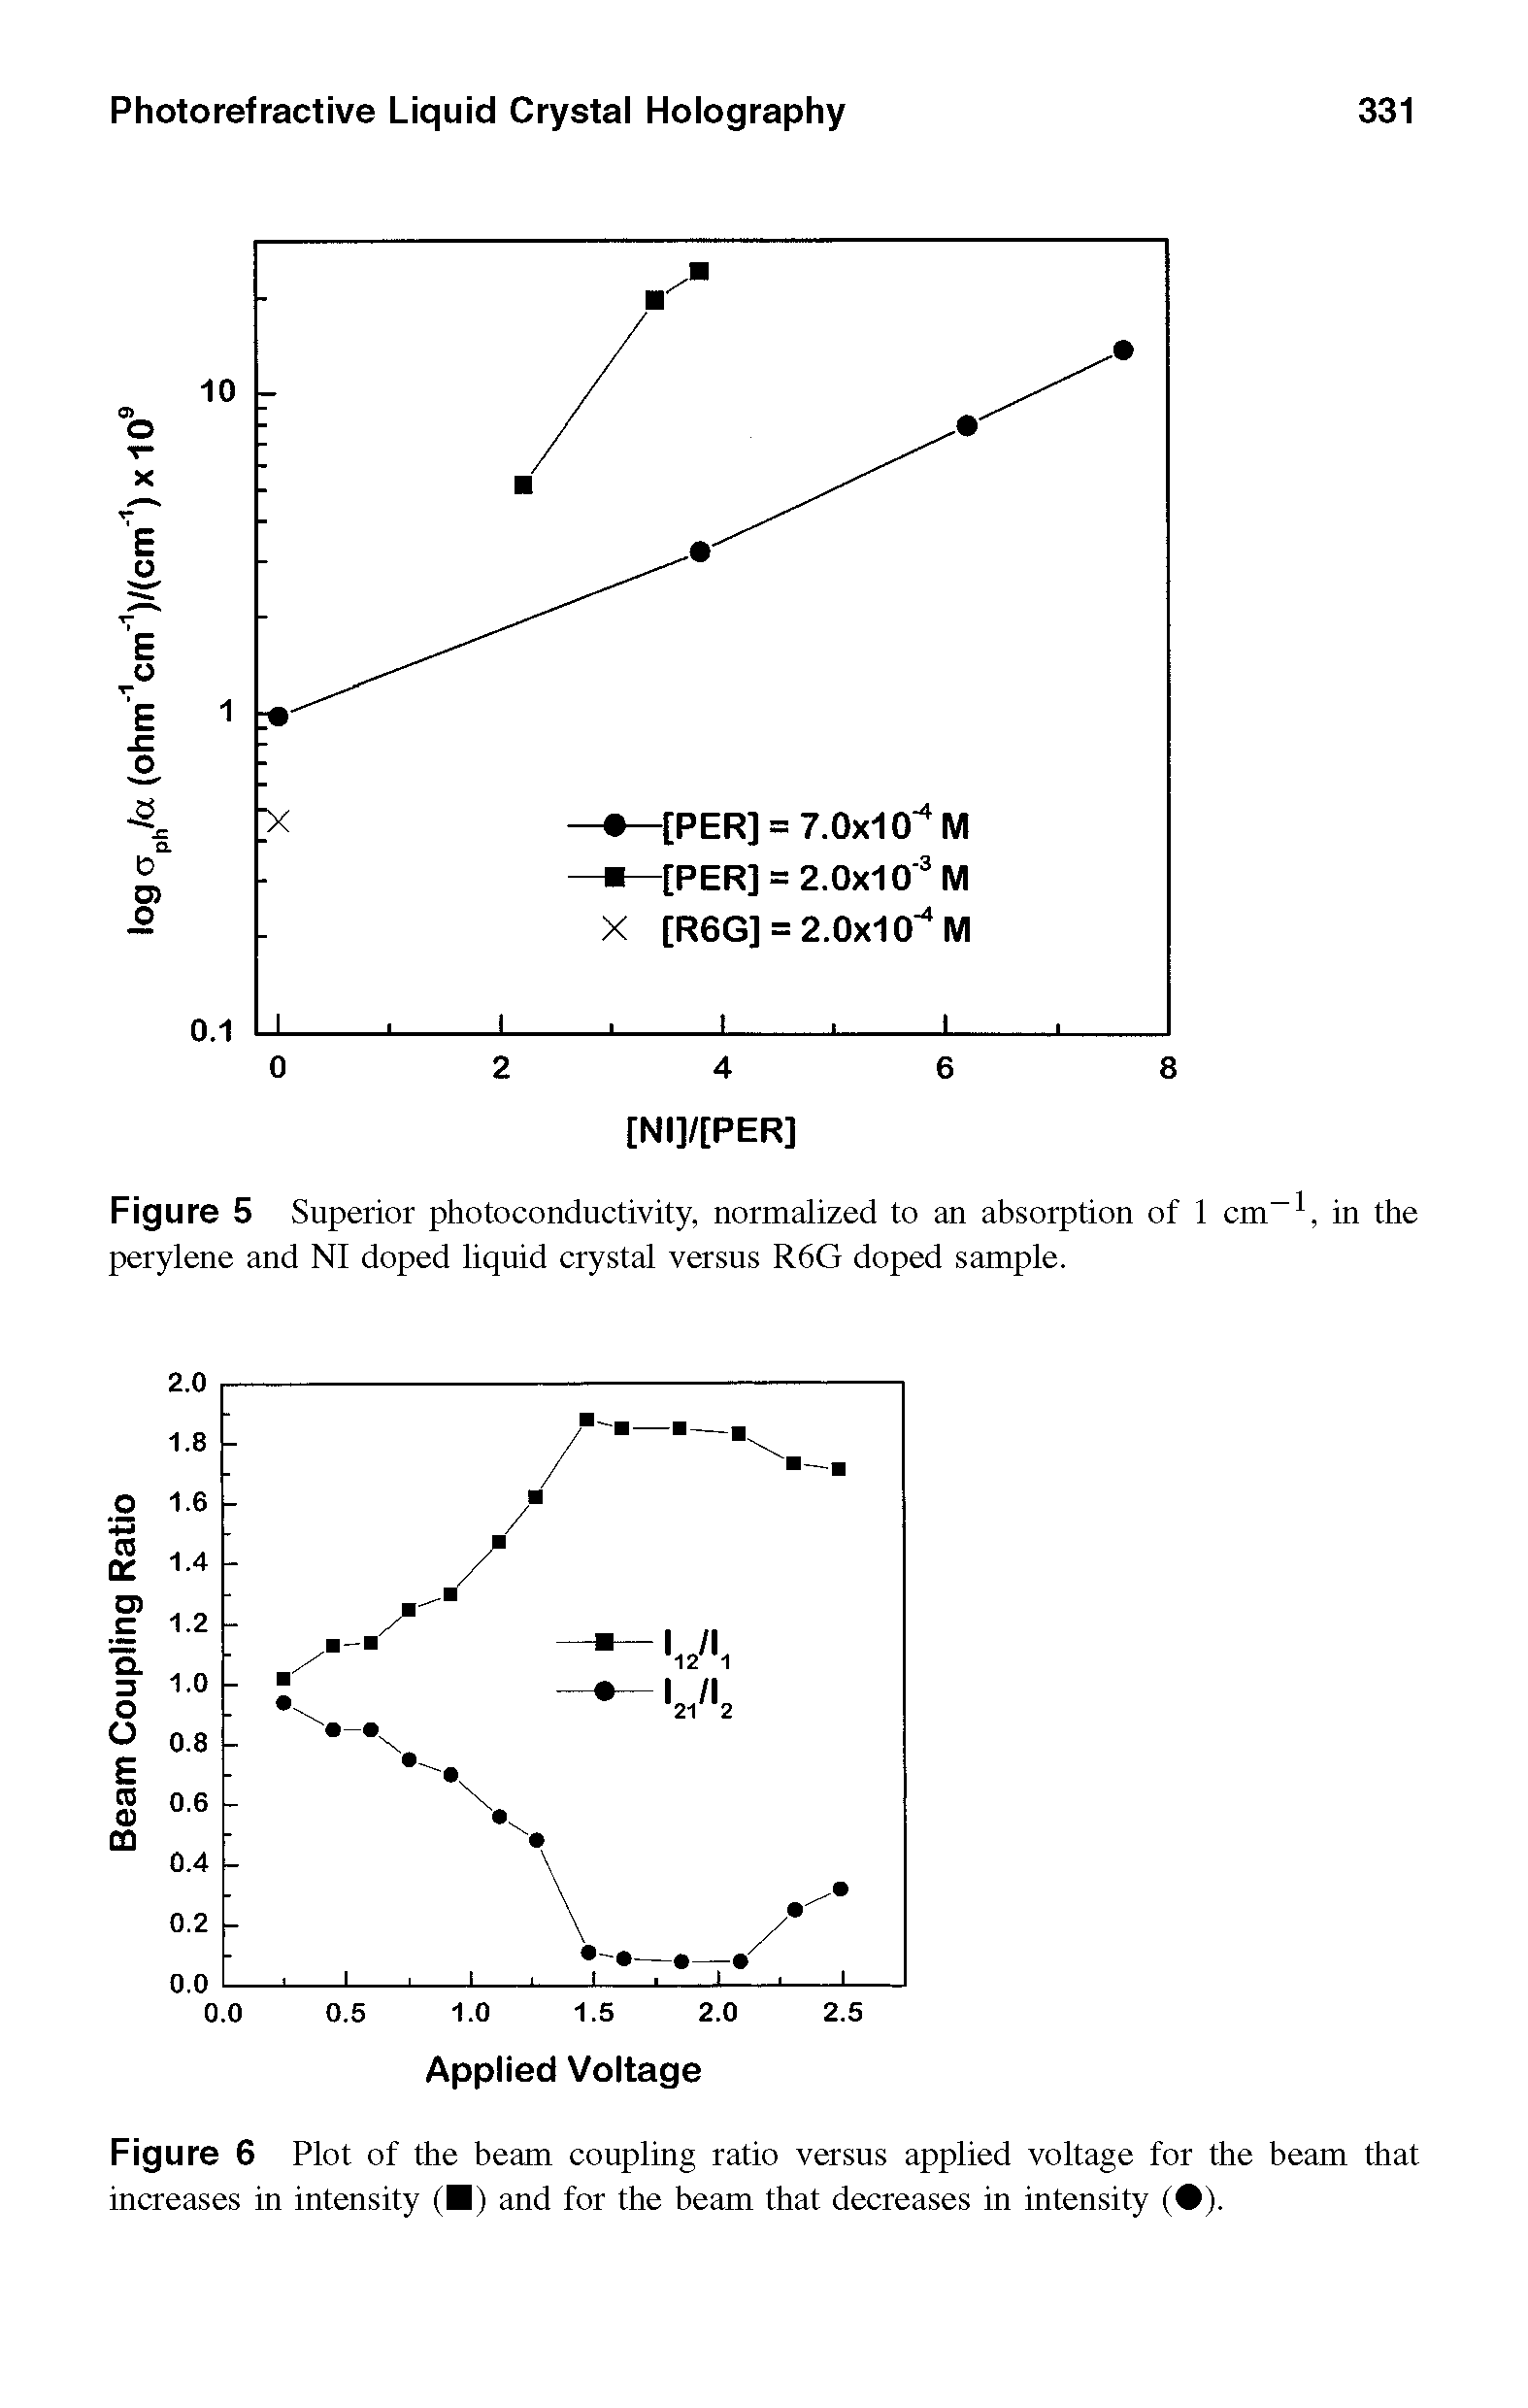 Figure 5 Superior photoconductivity, normalized to an absorption of 1 cm" perylene and NI doped liquid crystal versus R6G doped sample.